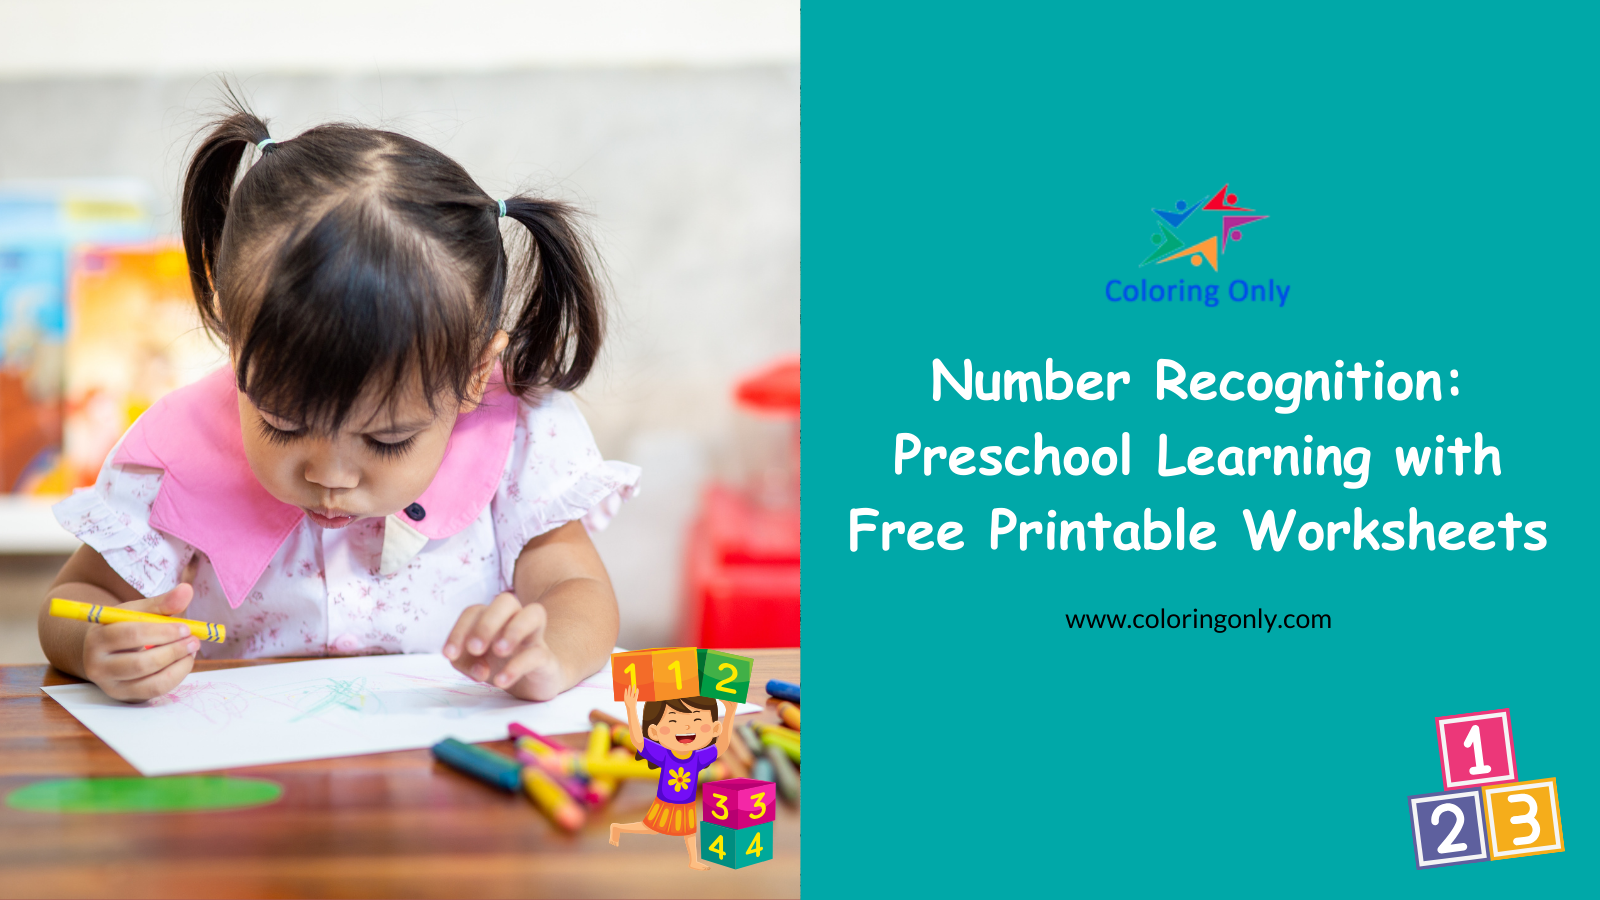 Number Recognition: Preschool Learning with Free Printable Worksheets